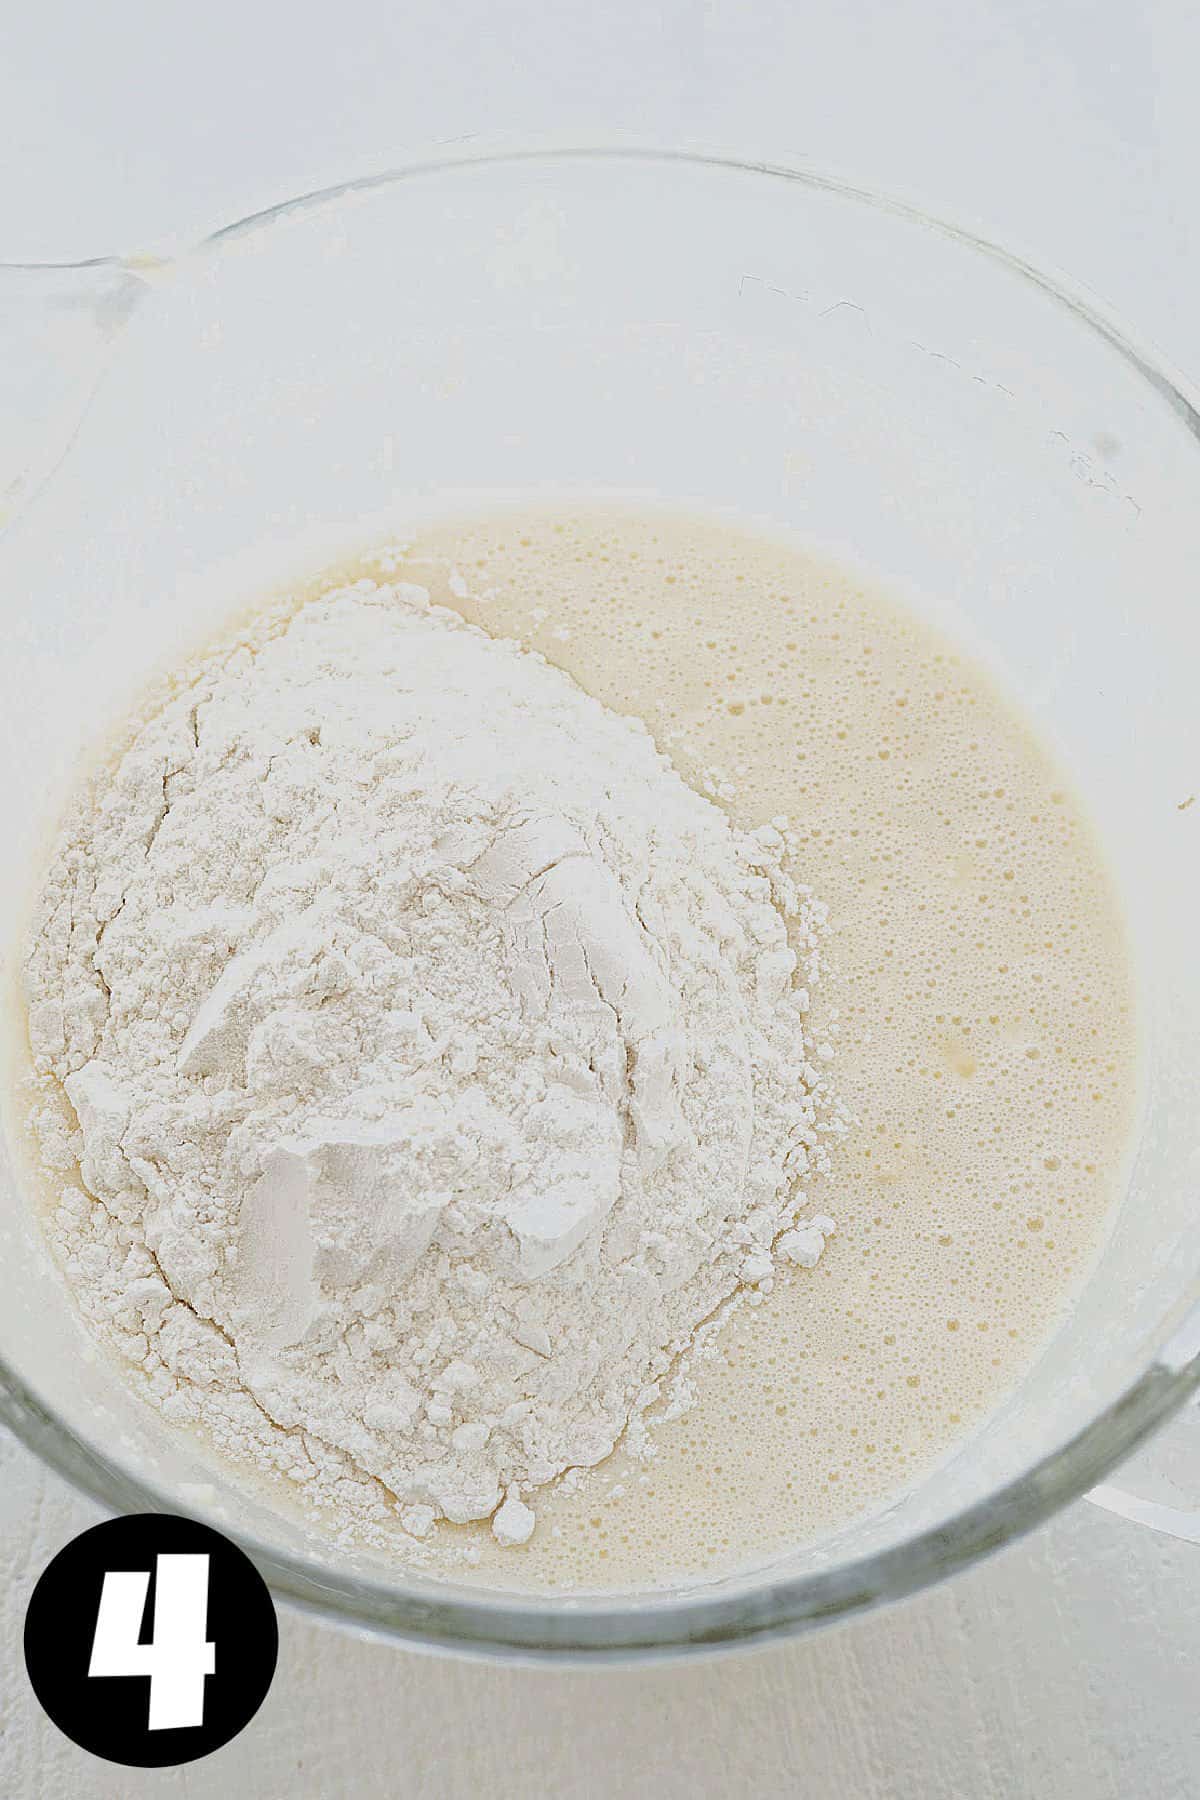 Wet ingredients with flour on top in a mixing bowl.